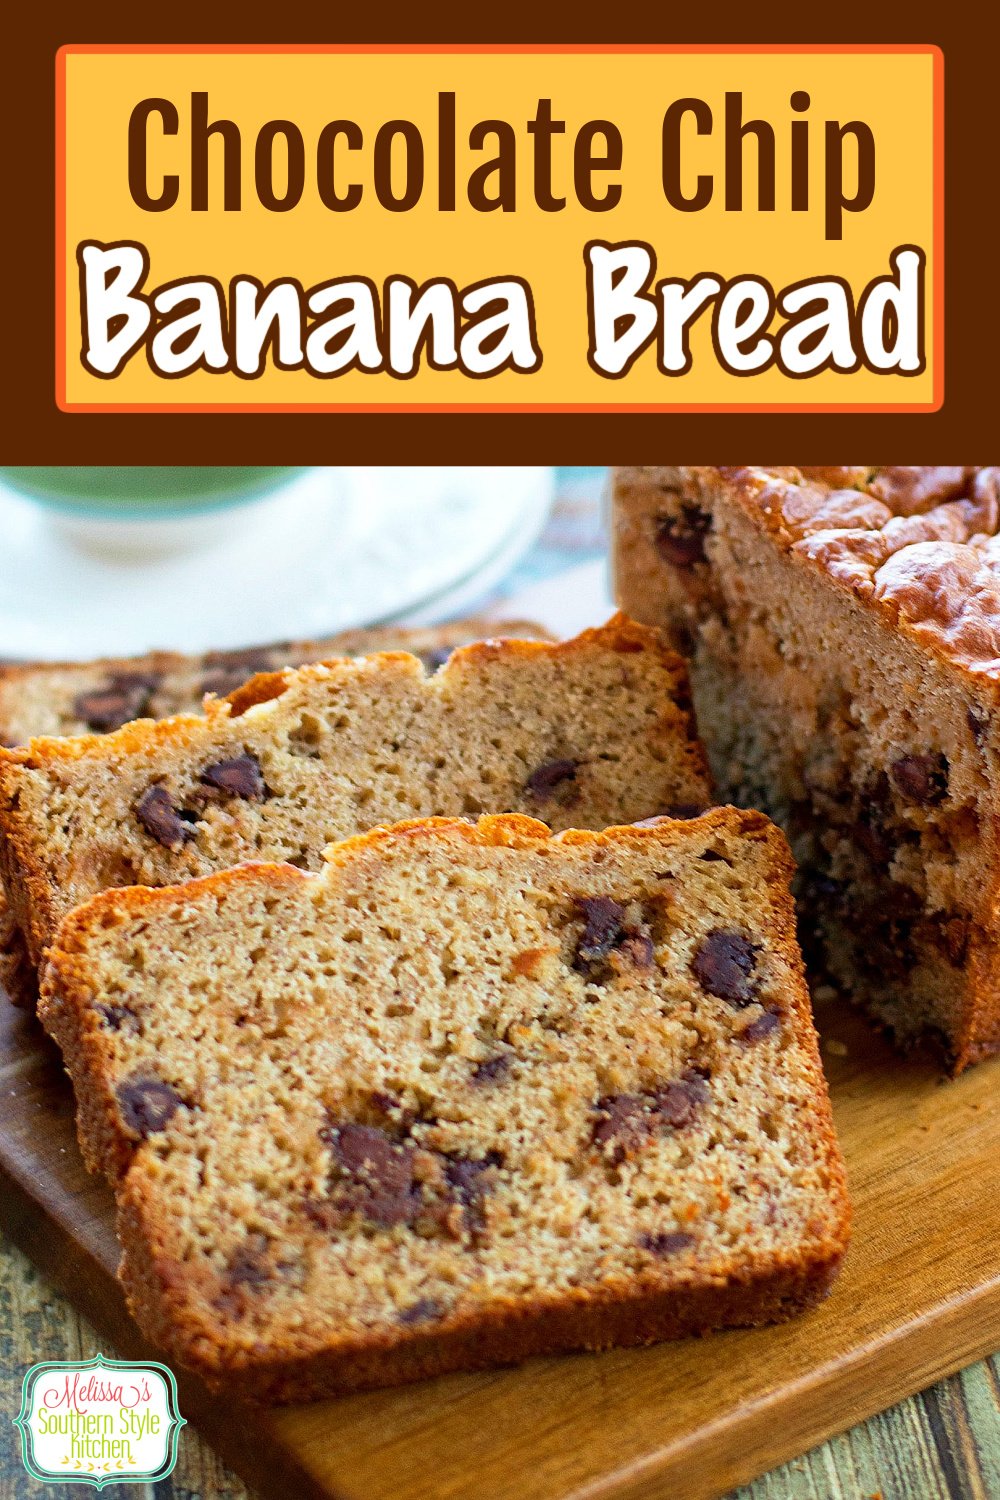 Enjoy a generous slice of Chocolate Chip Banana Bread for an any-time-of-day treat #bananabread #chocolatechip #chocolatechipbananabread #breadrecipes #bananas #brunch #teatime #breakfastrecipes #southernfood #southernrecipes via @melissasssk